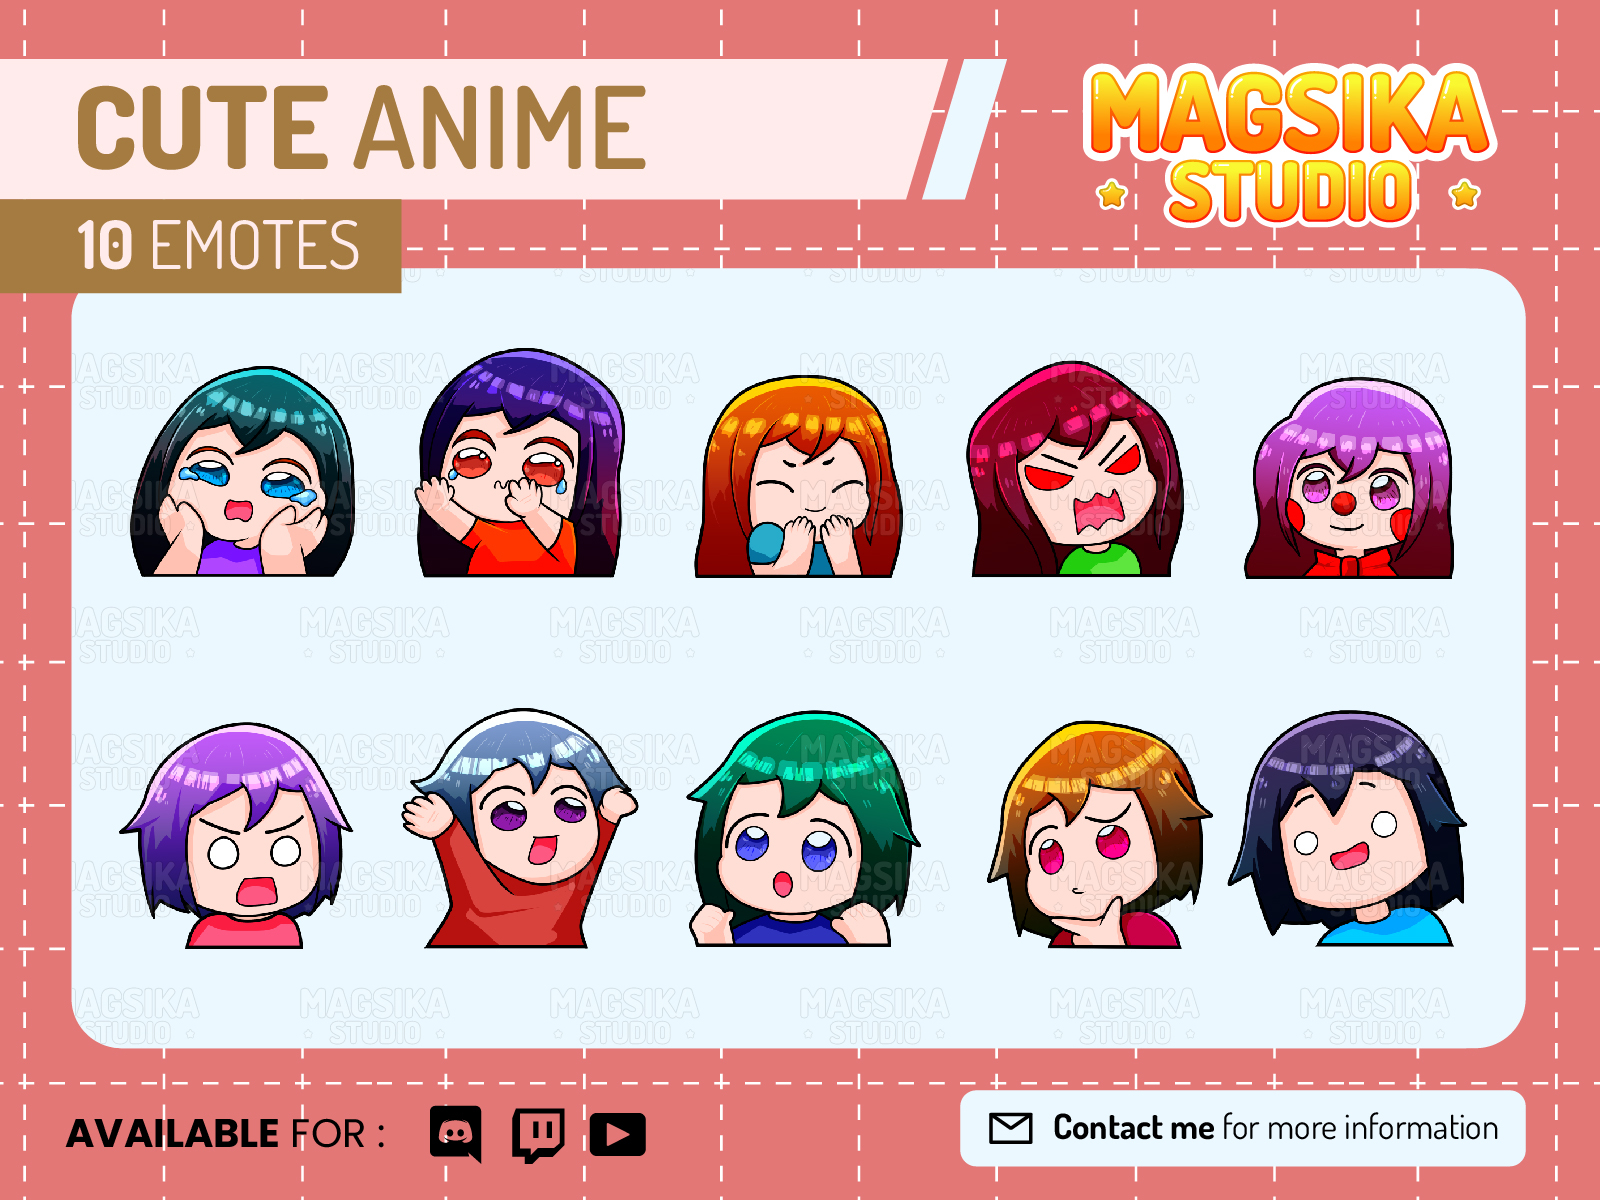 FOR HIRE Custom Twitch and Discord PNGTubers Emotes Anime Styles  Details on Comment  rHungryArtists